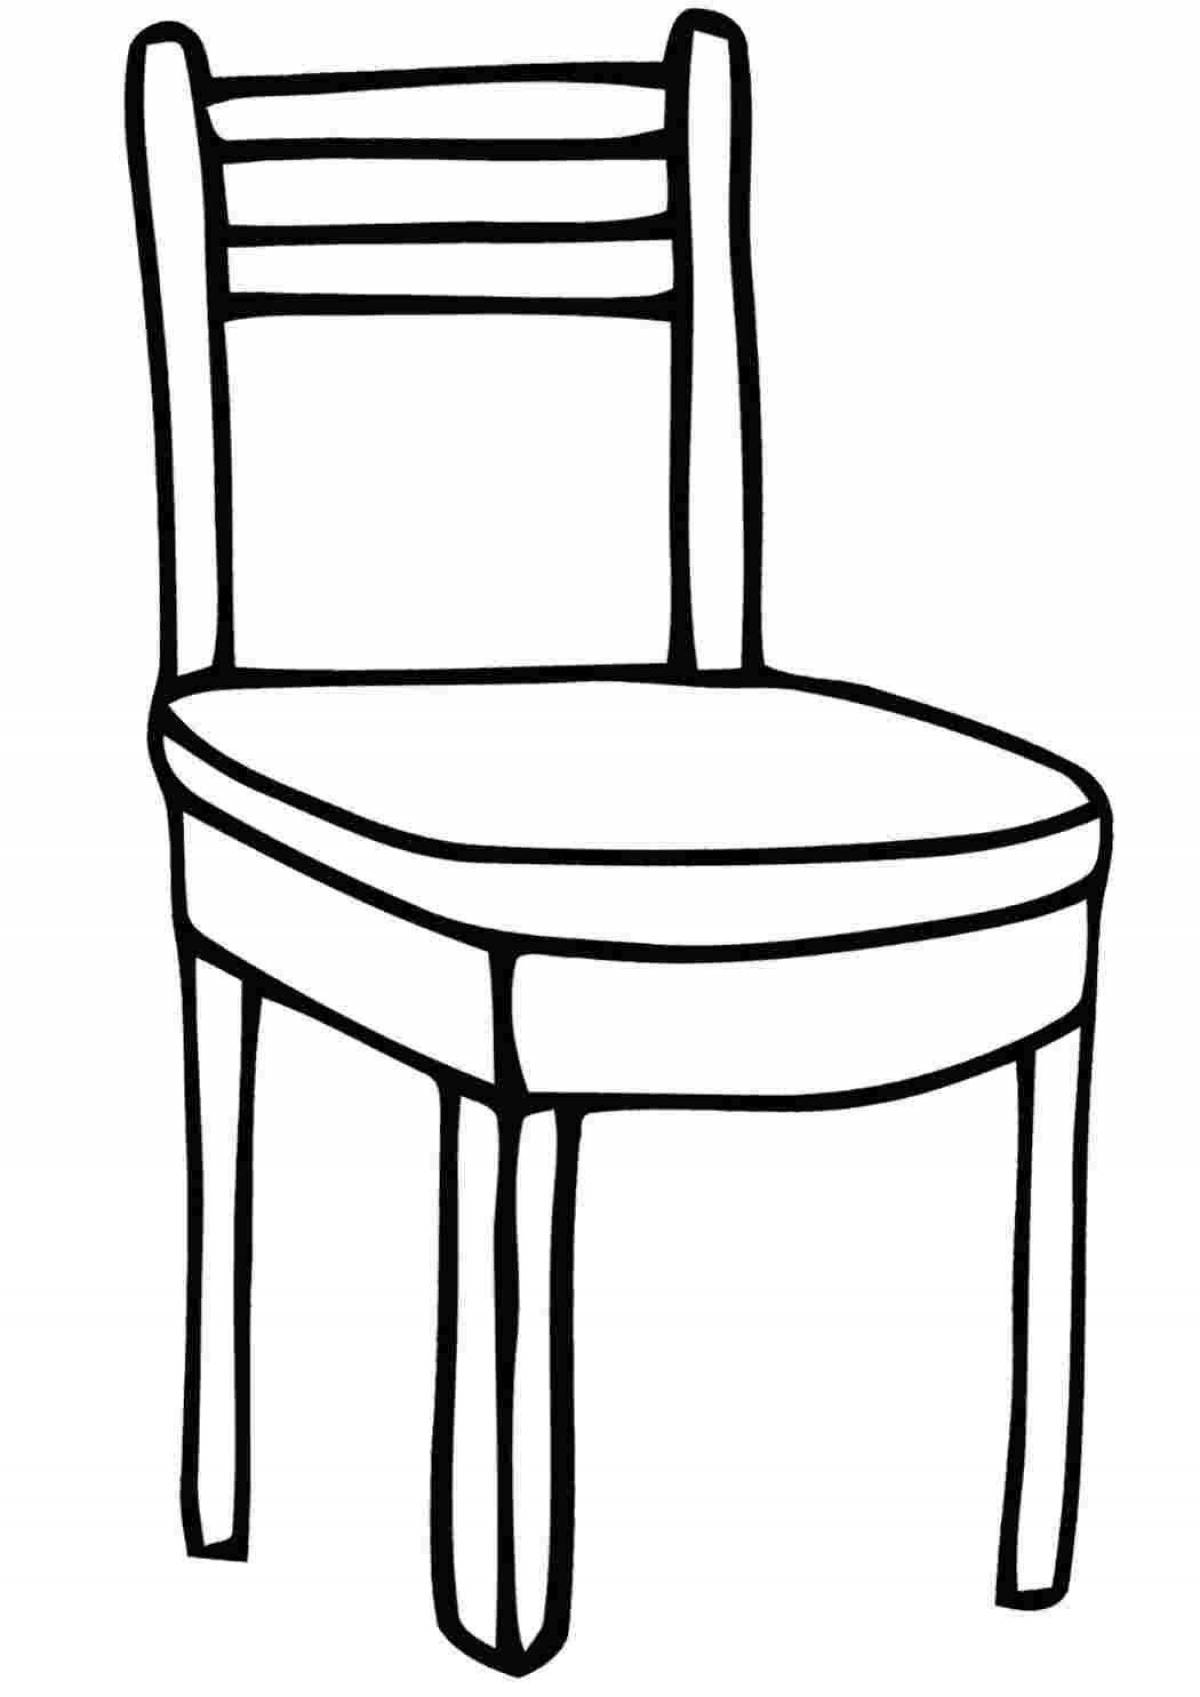 Colorful chair coloring book for kids